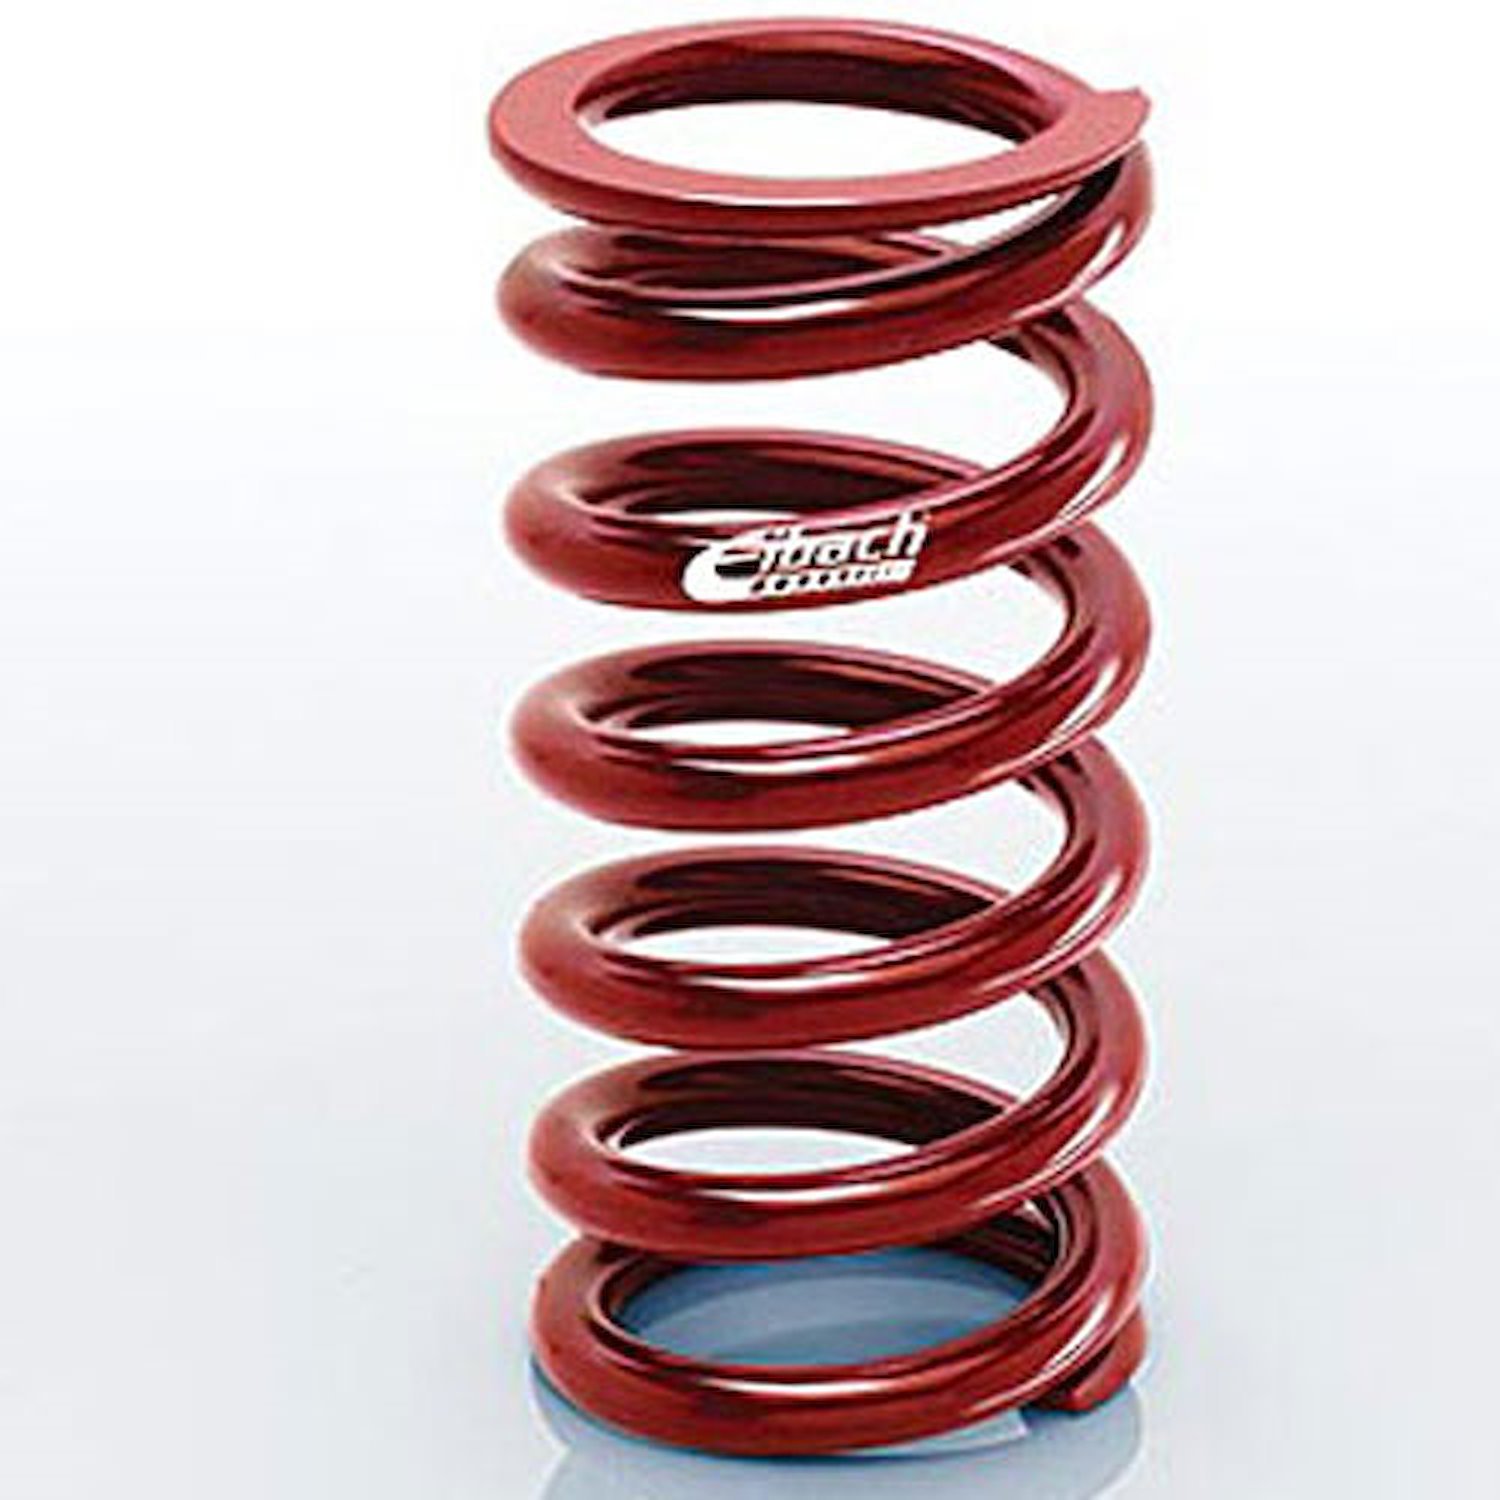 0950.500.0250 EIBACH CONVENTIONAL FRONT SPRING